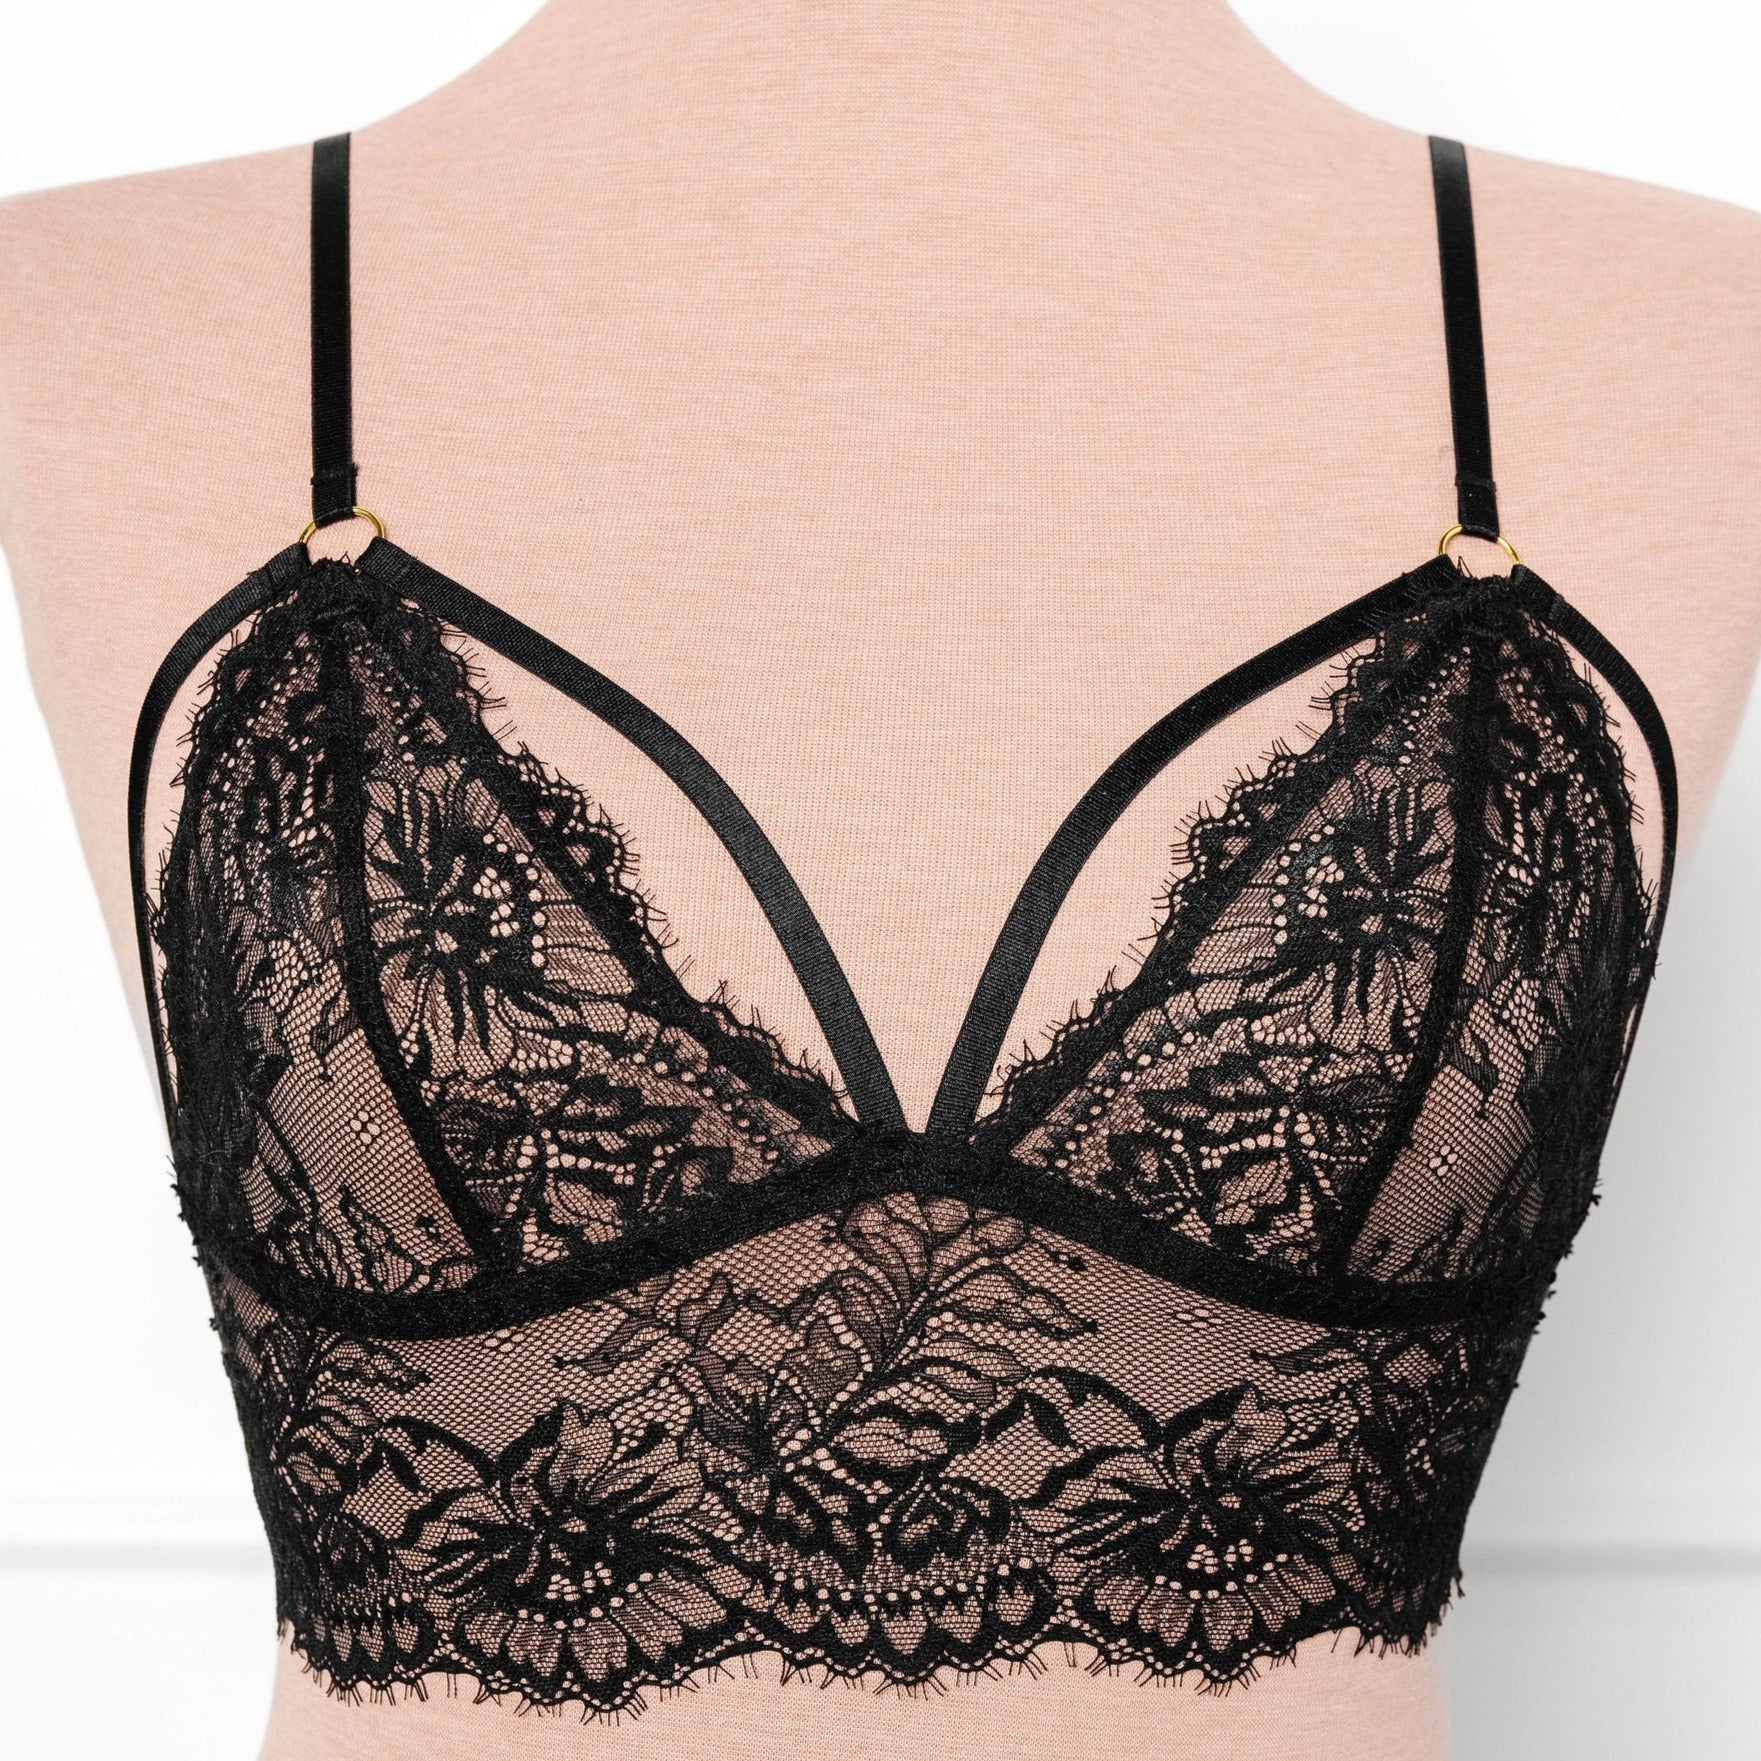 Eyelash Lace Caged Bralette - Black by Mentionables